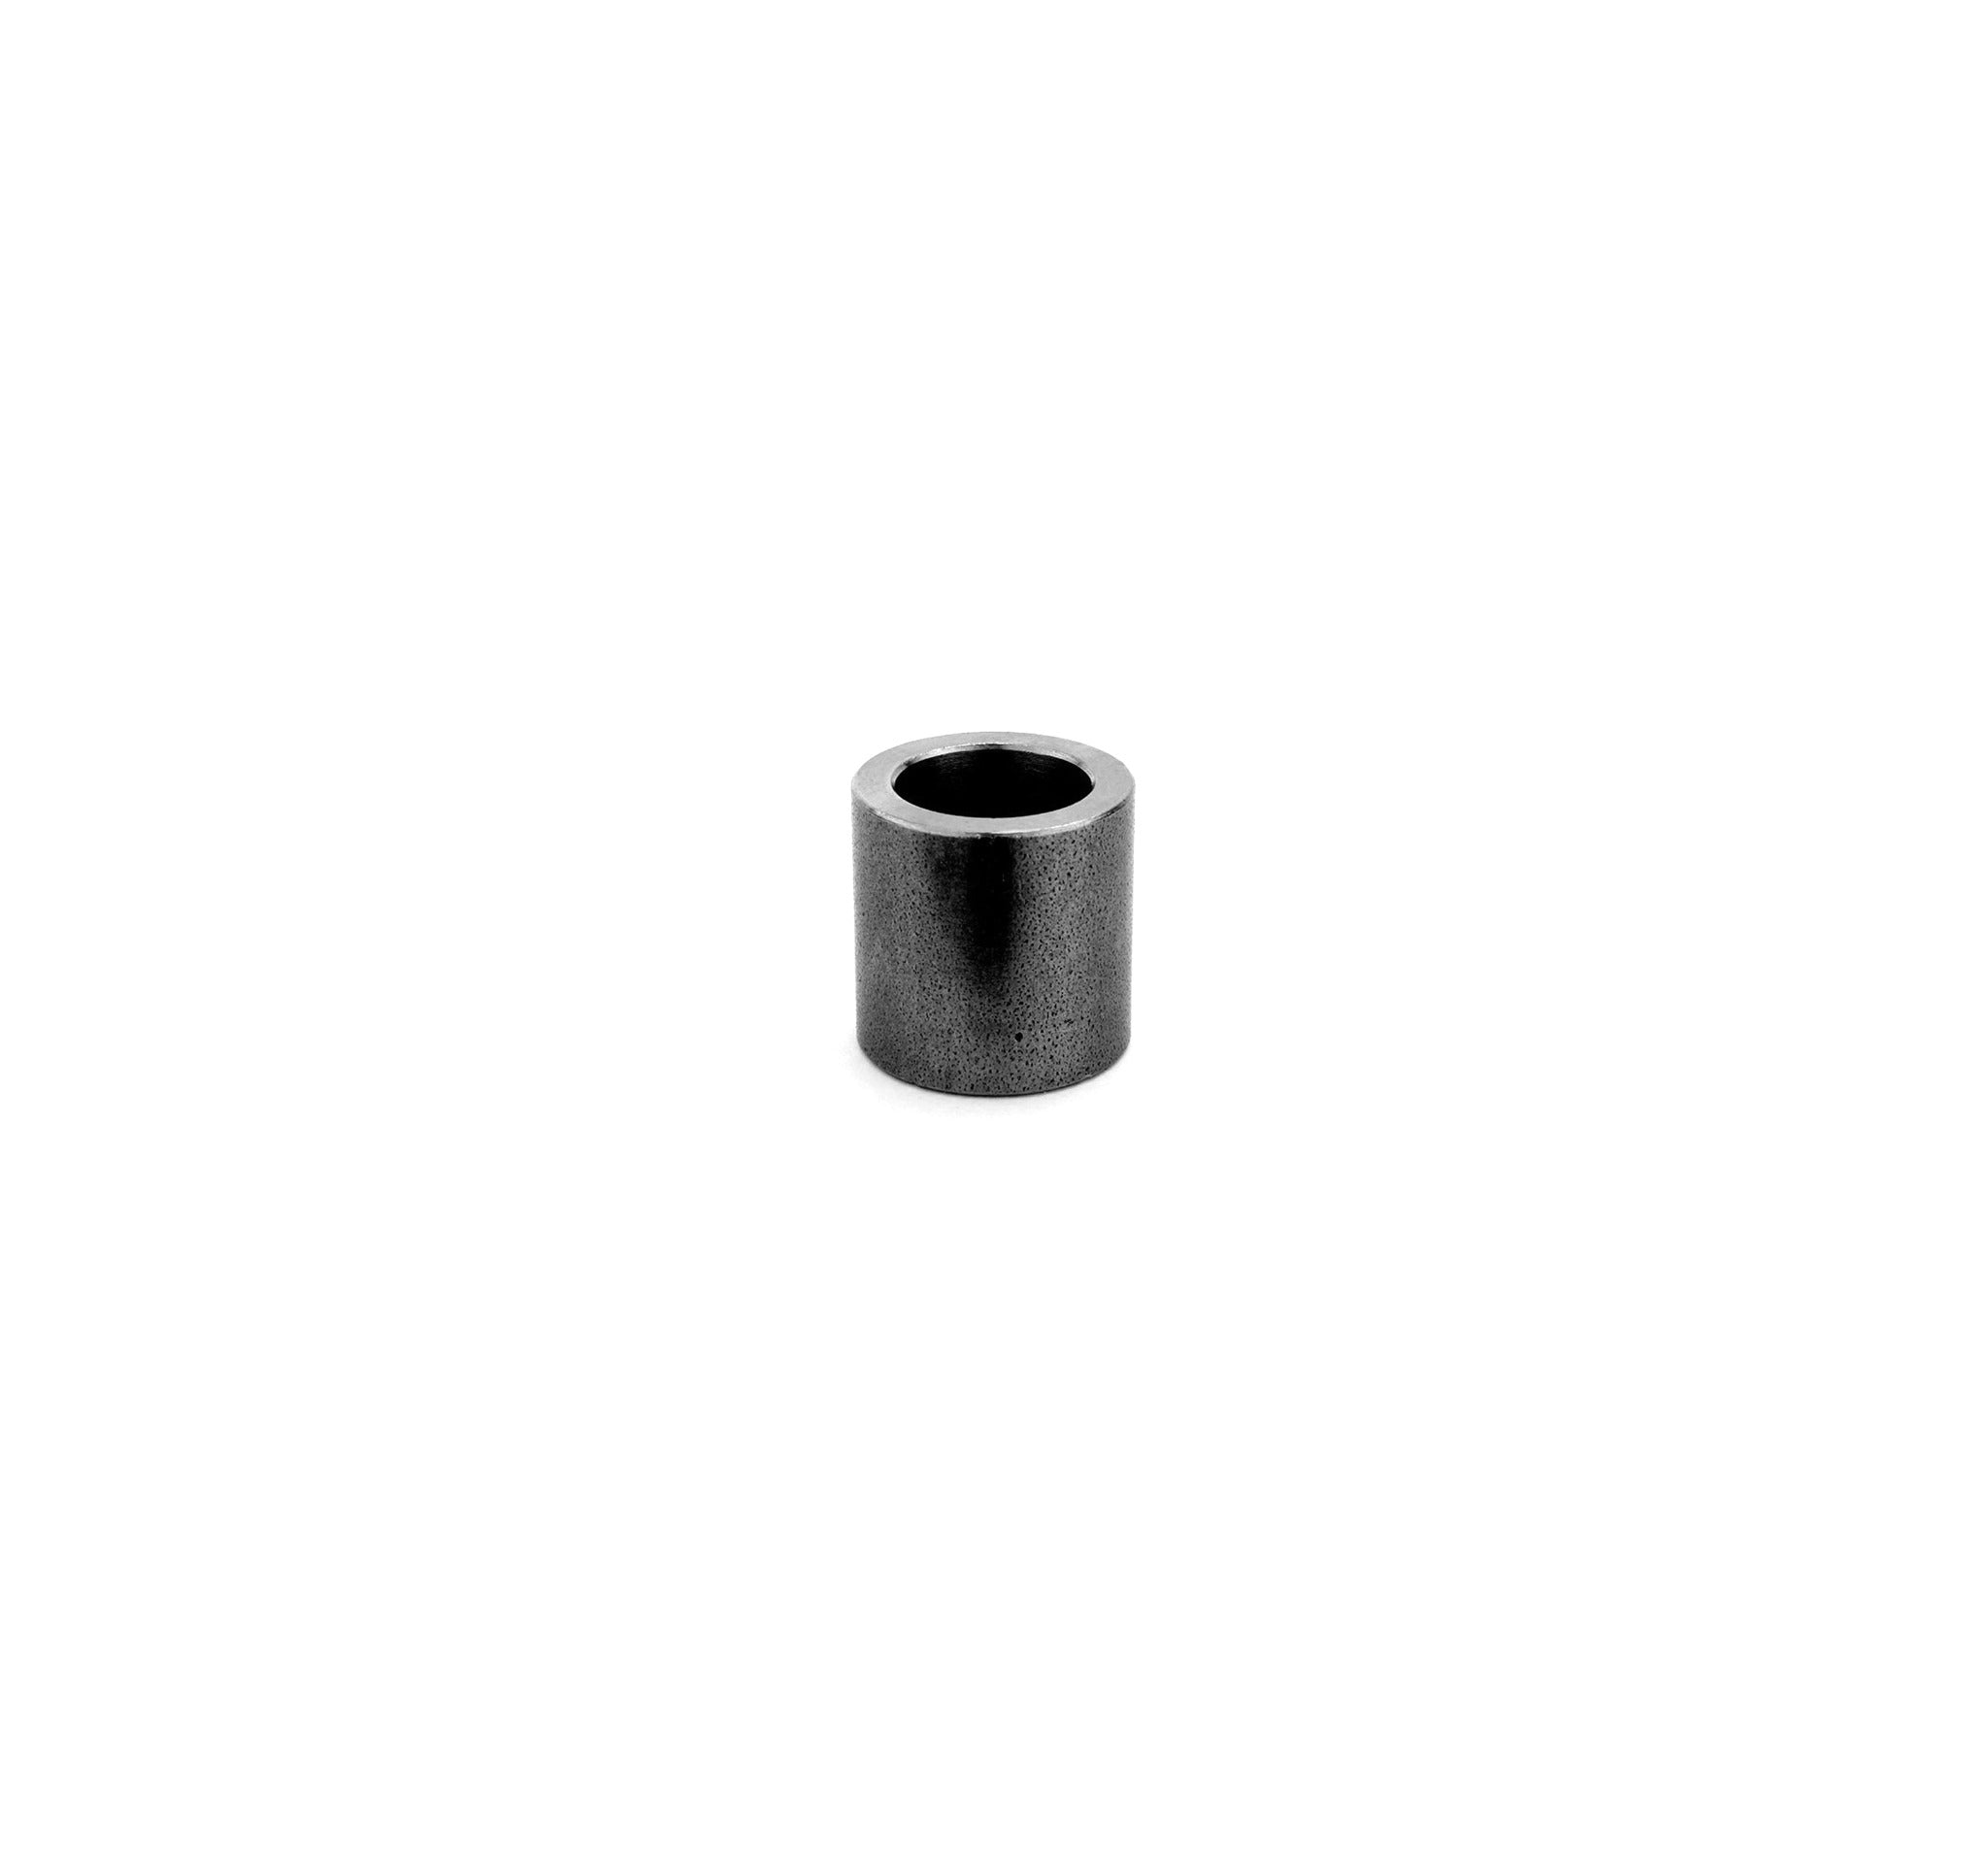 Spacer 11/16" Bore and 1" length